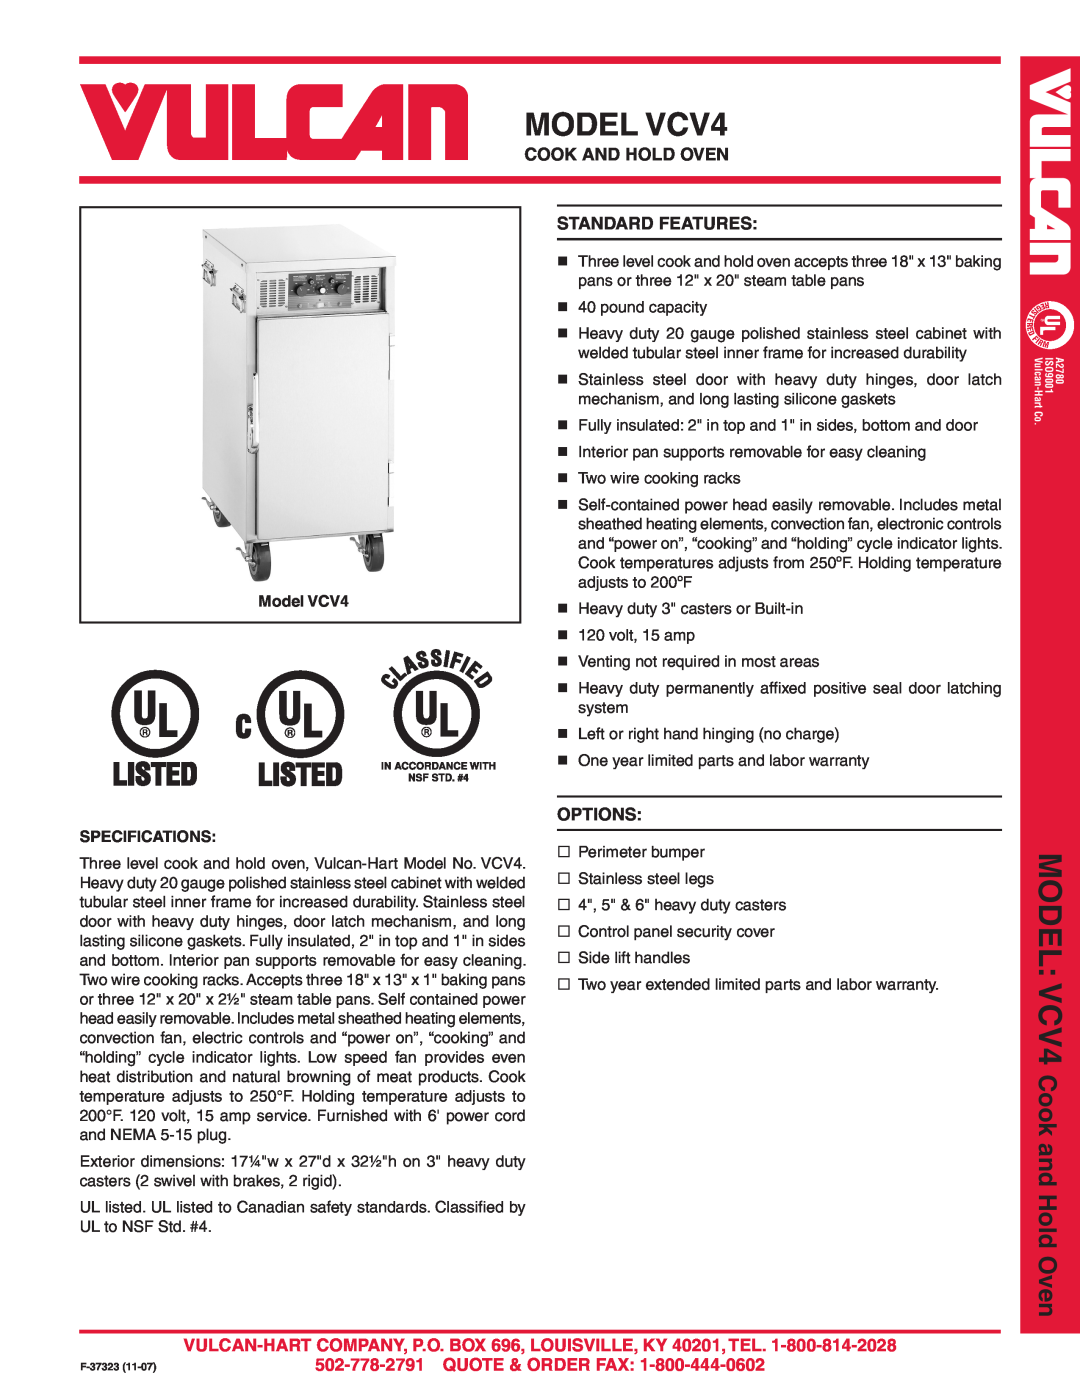 Vulcan-Hart warranty MODEL VCV4, Cook And Hold Oven, Standard Features, Options, Quote & Order Fax 